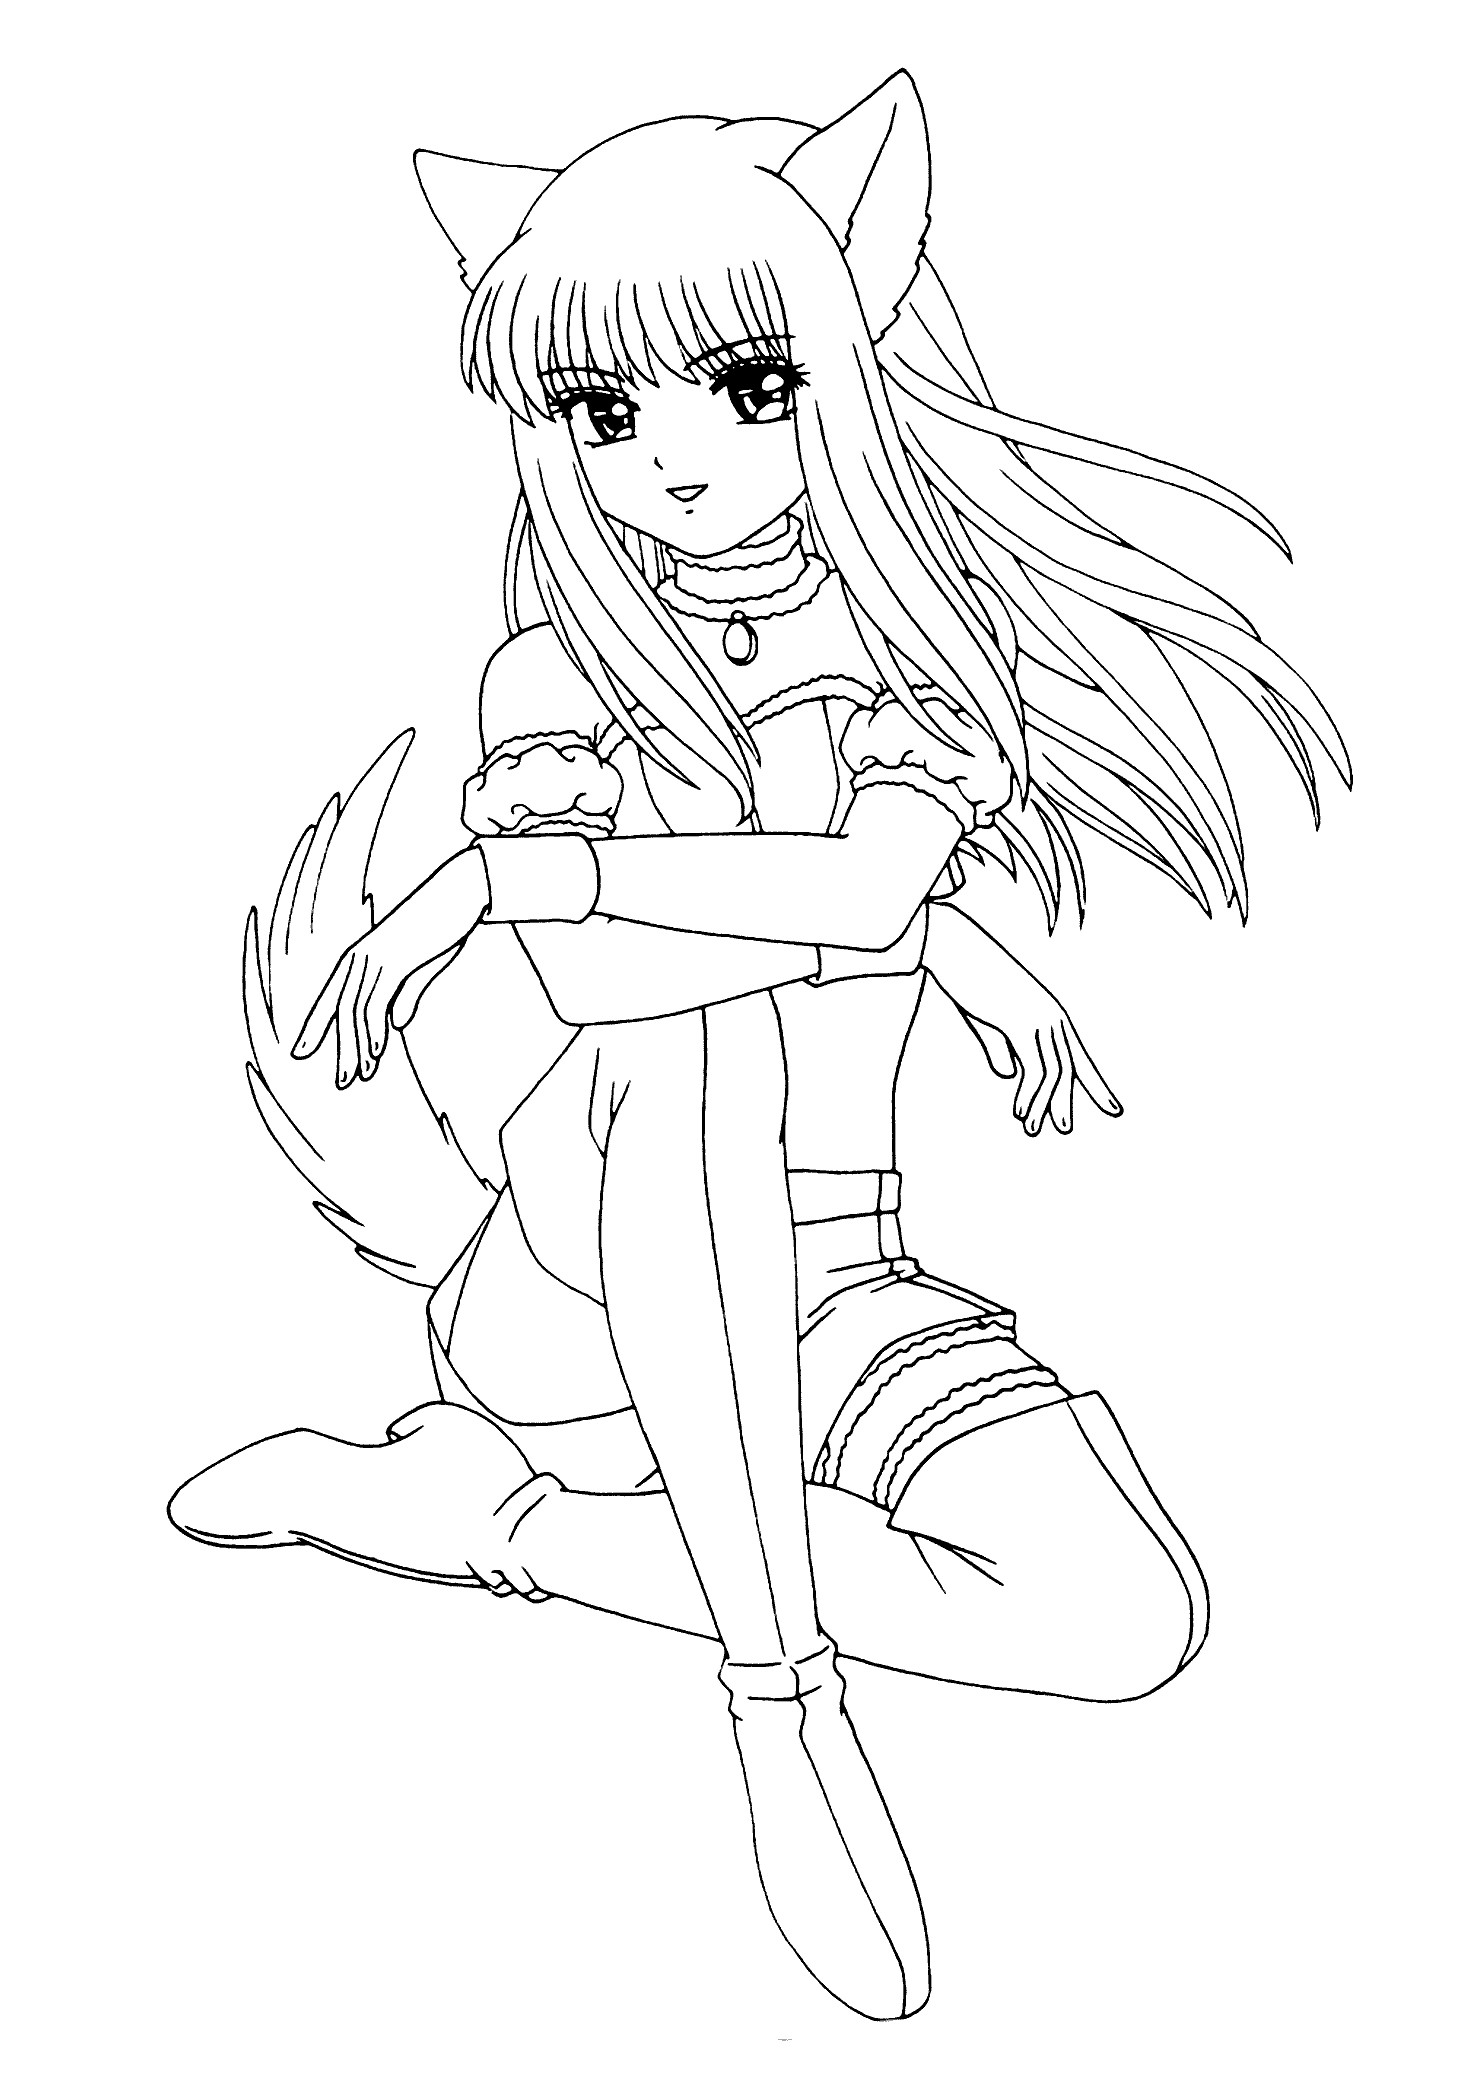 Coloring Sheets For Kids Girls
 13 Best of Anime Girl Coloring Pages Bestofcoloring